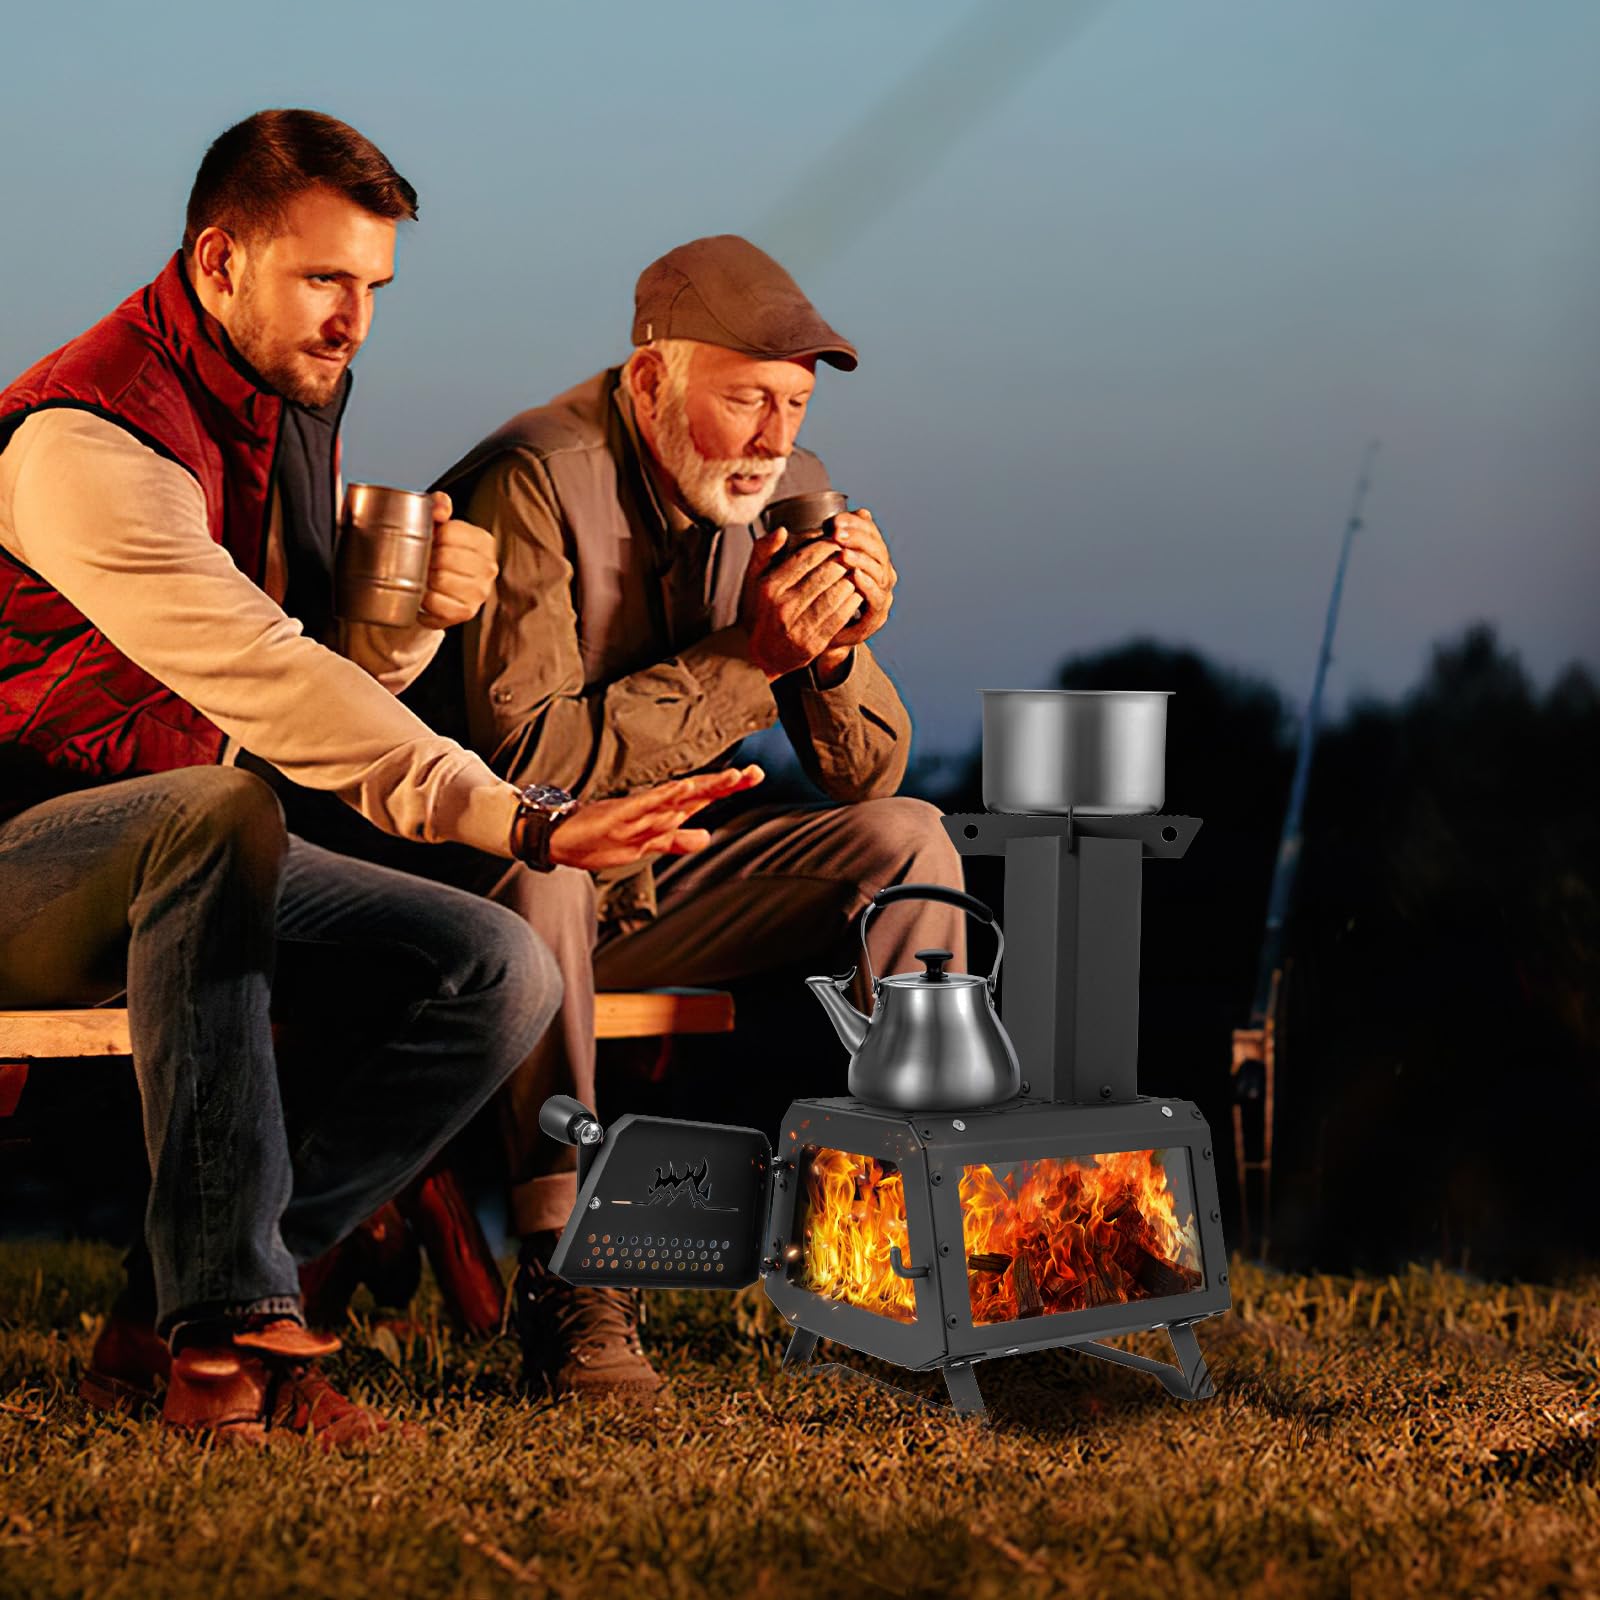 Giantex Portable Camping Wood Stove - Mini Wood Burning Stove w/ 2 Cooking Positions